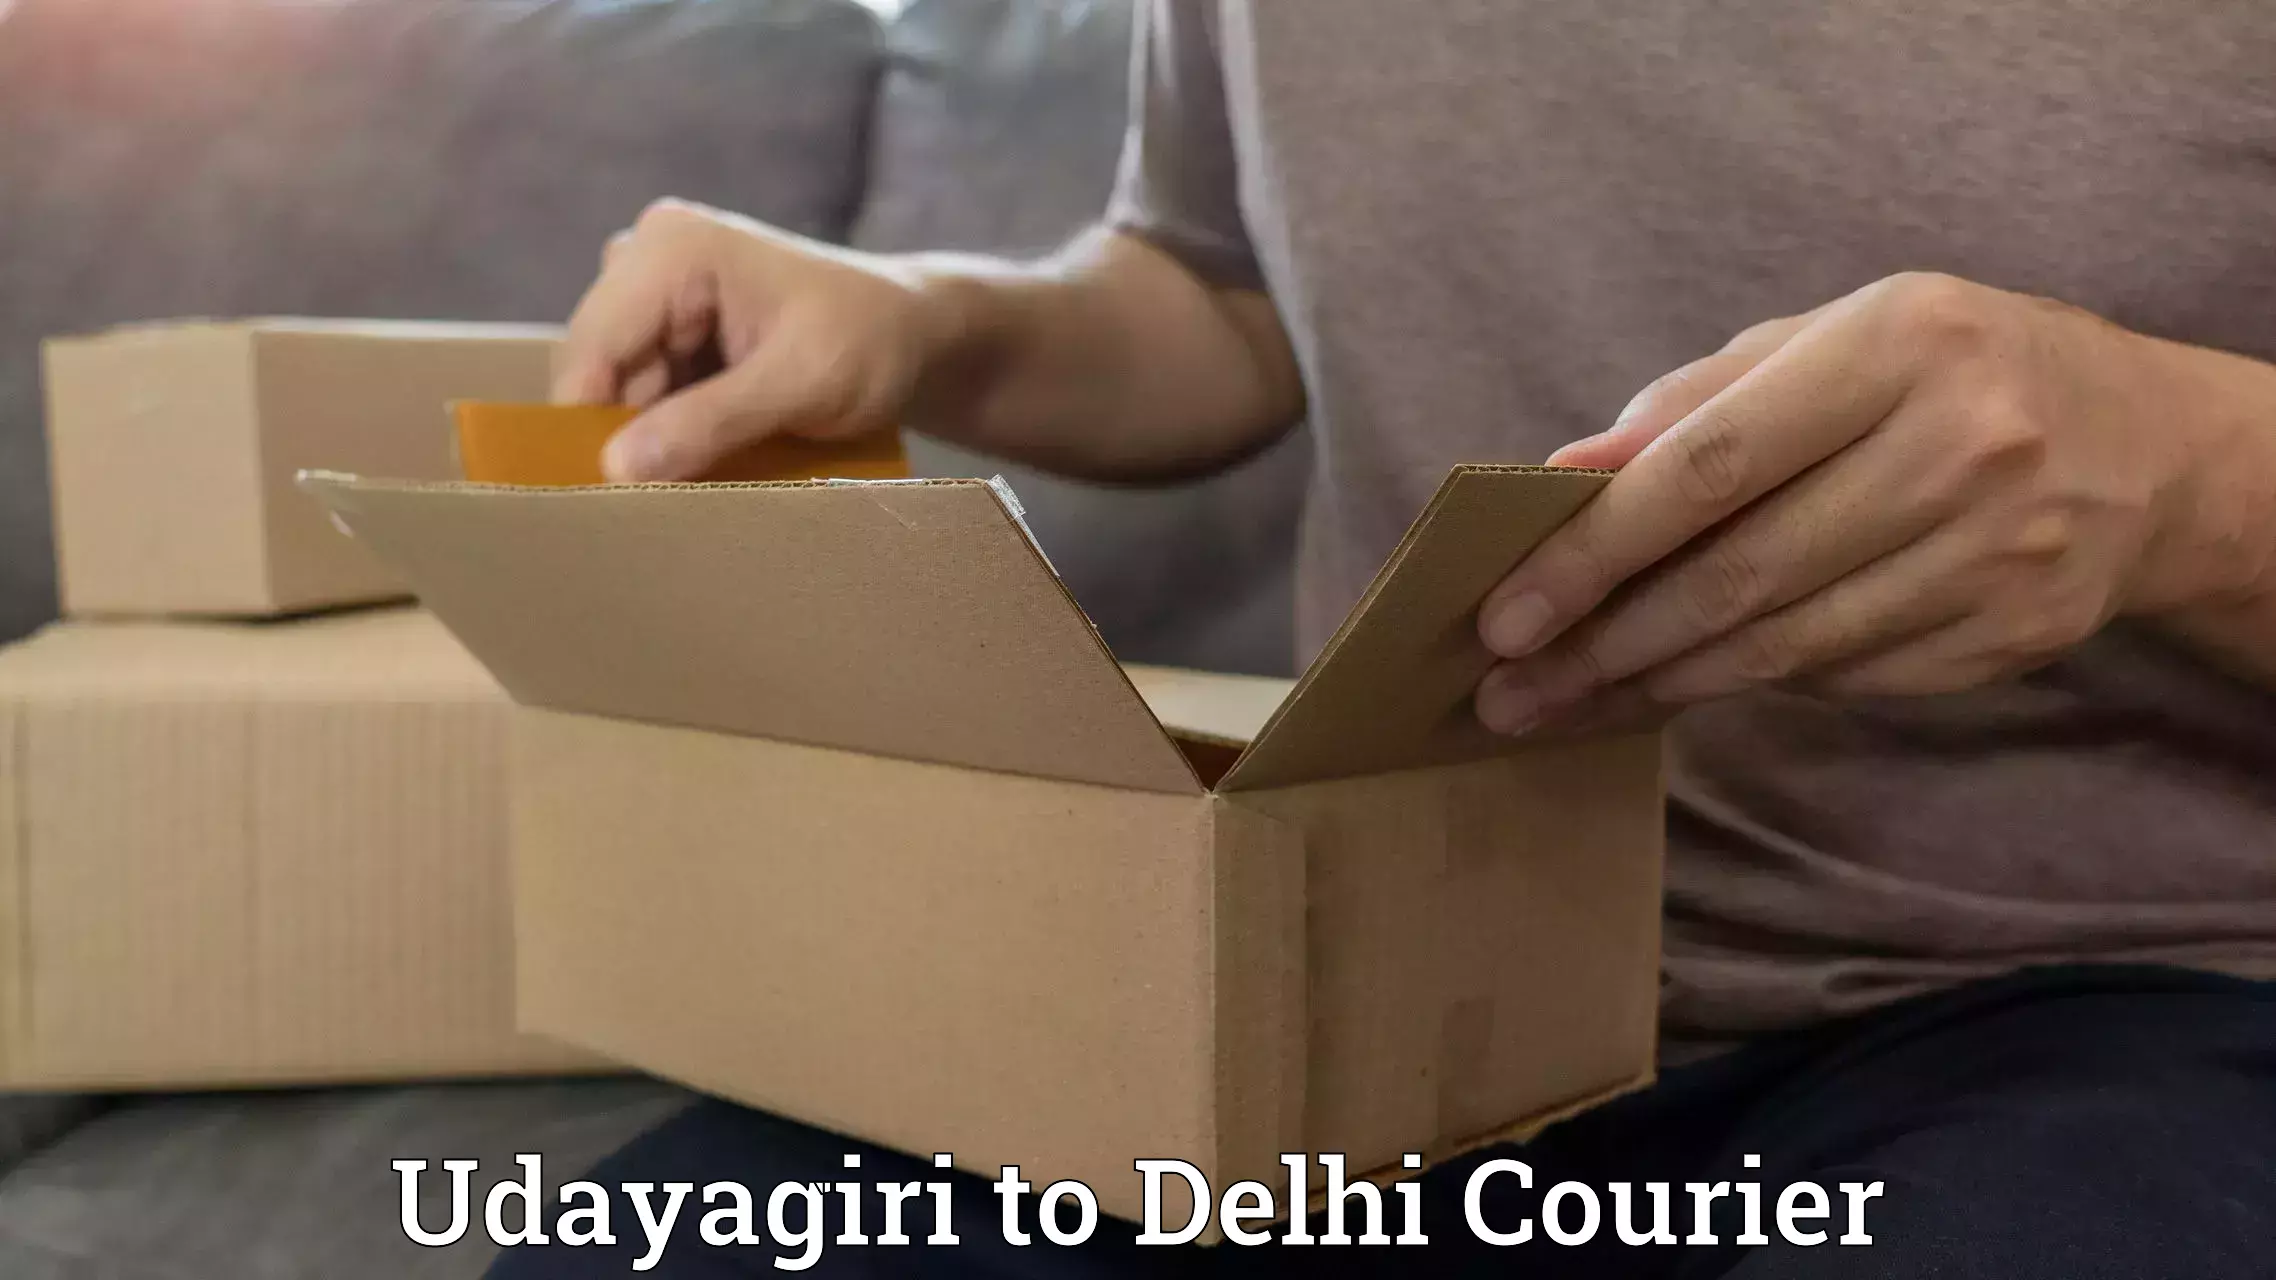 Cash on delivery service Udayagiri to NCR